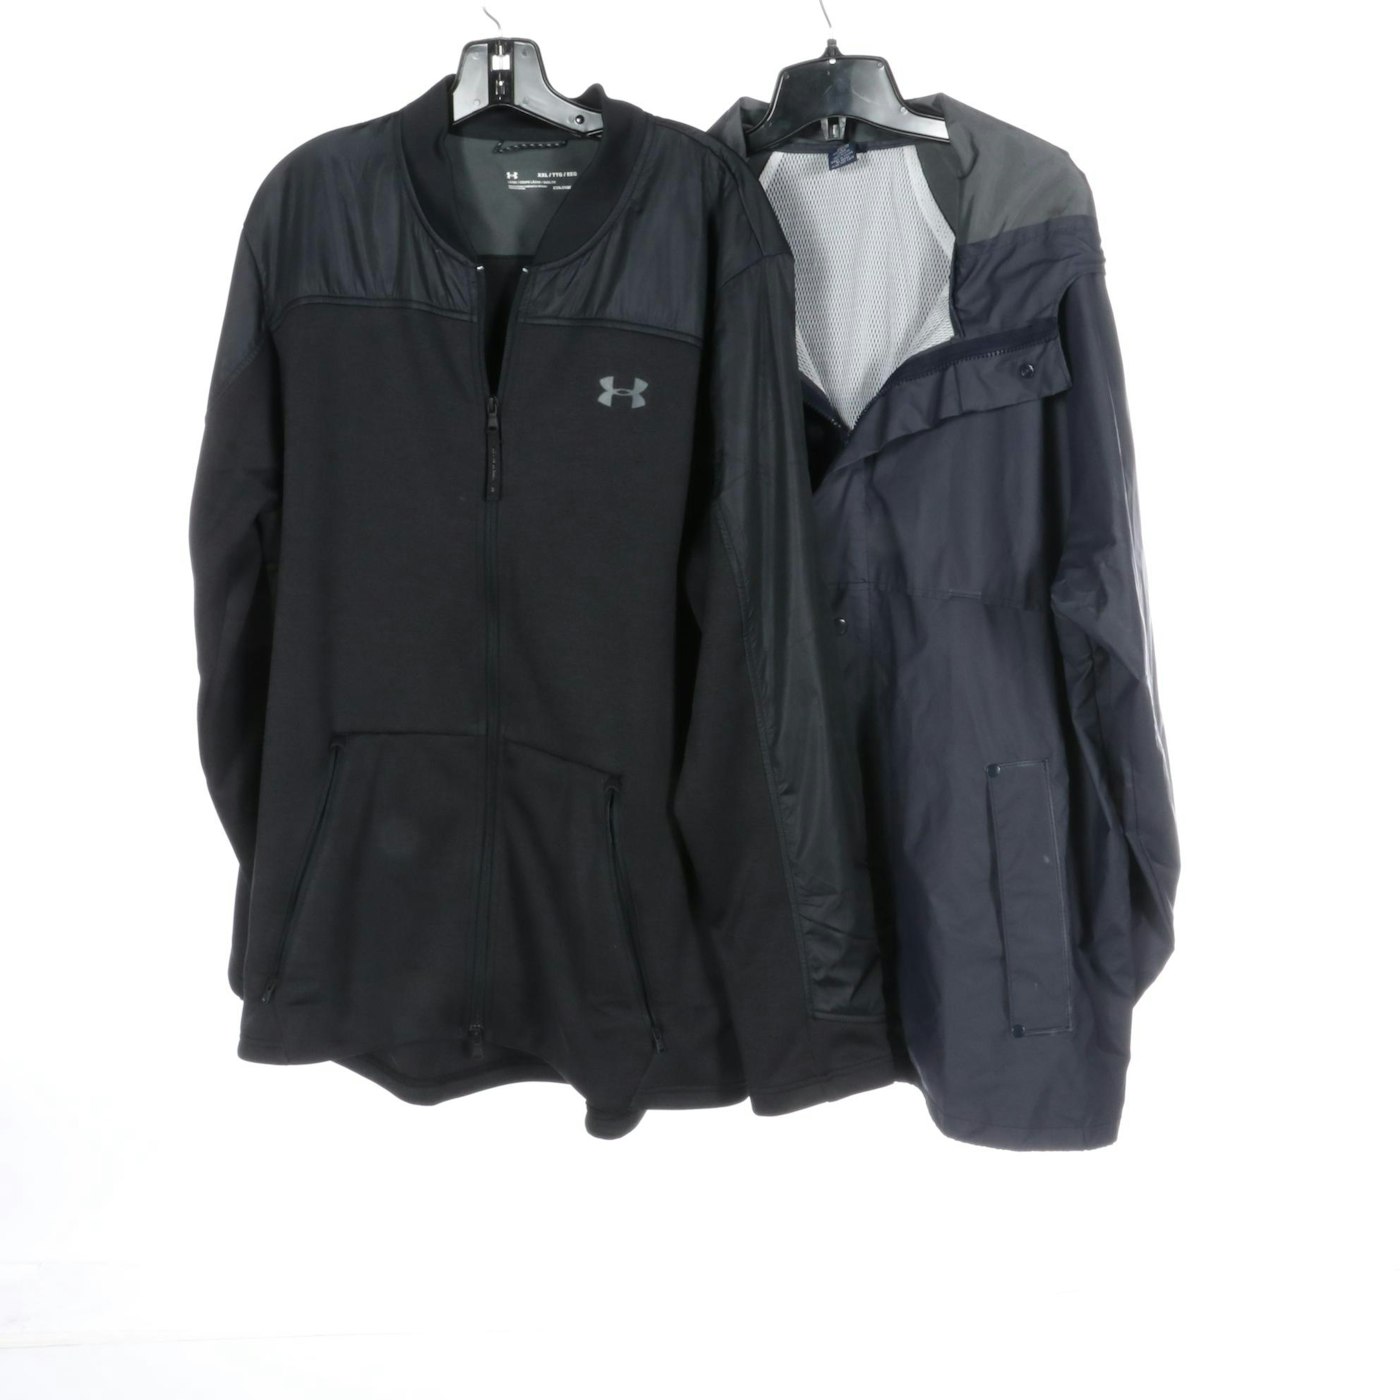 Under Armour Zip-Up Sweatshirt and Jacket with Lands' End Hooded ...